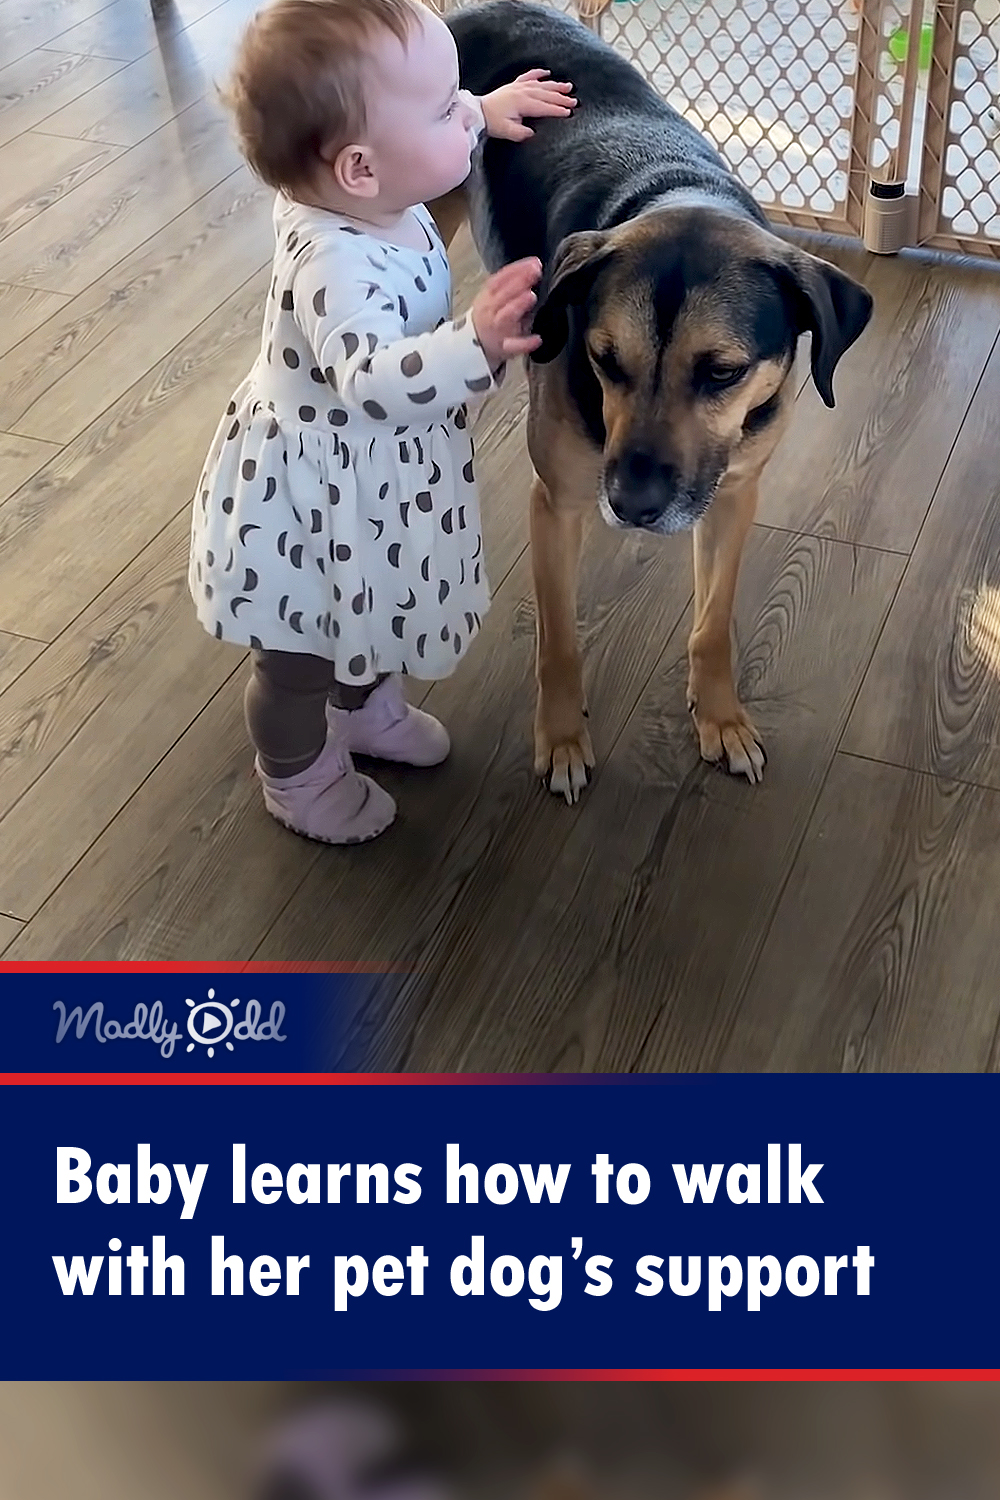 Baby learns how to walk with her pet dog’s support